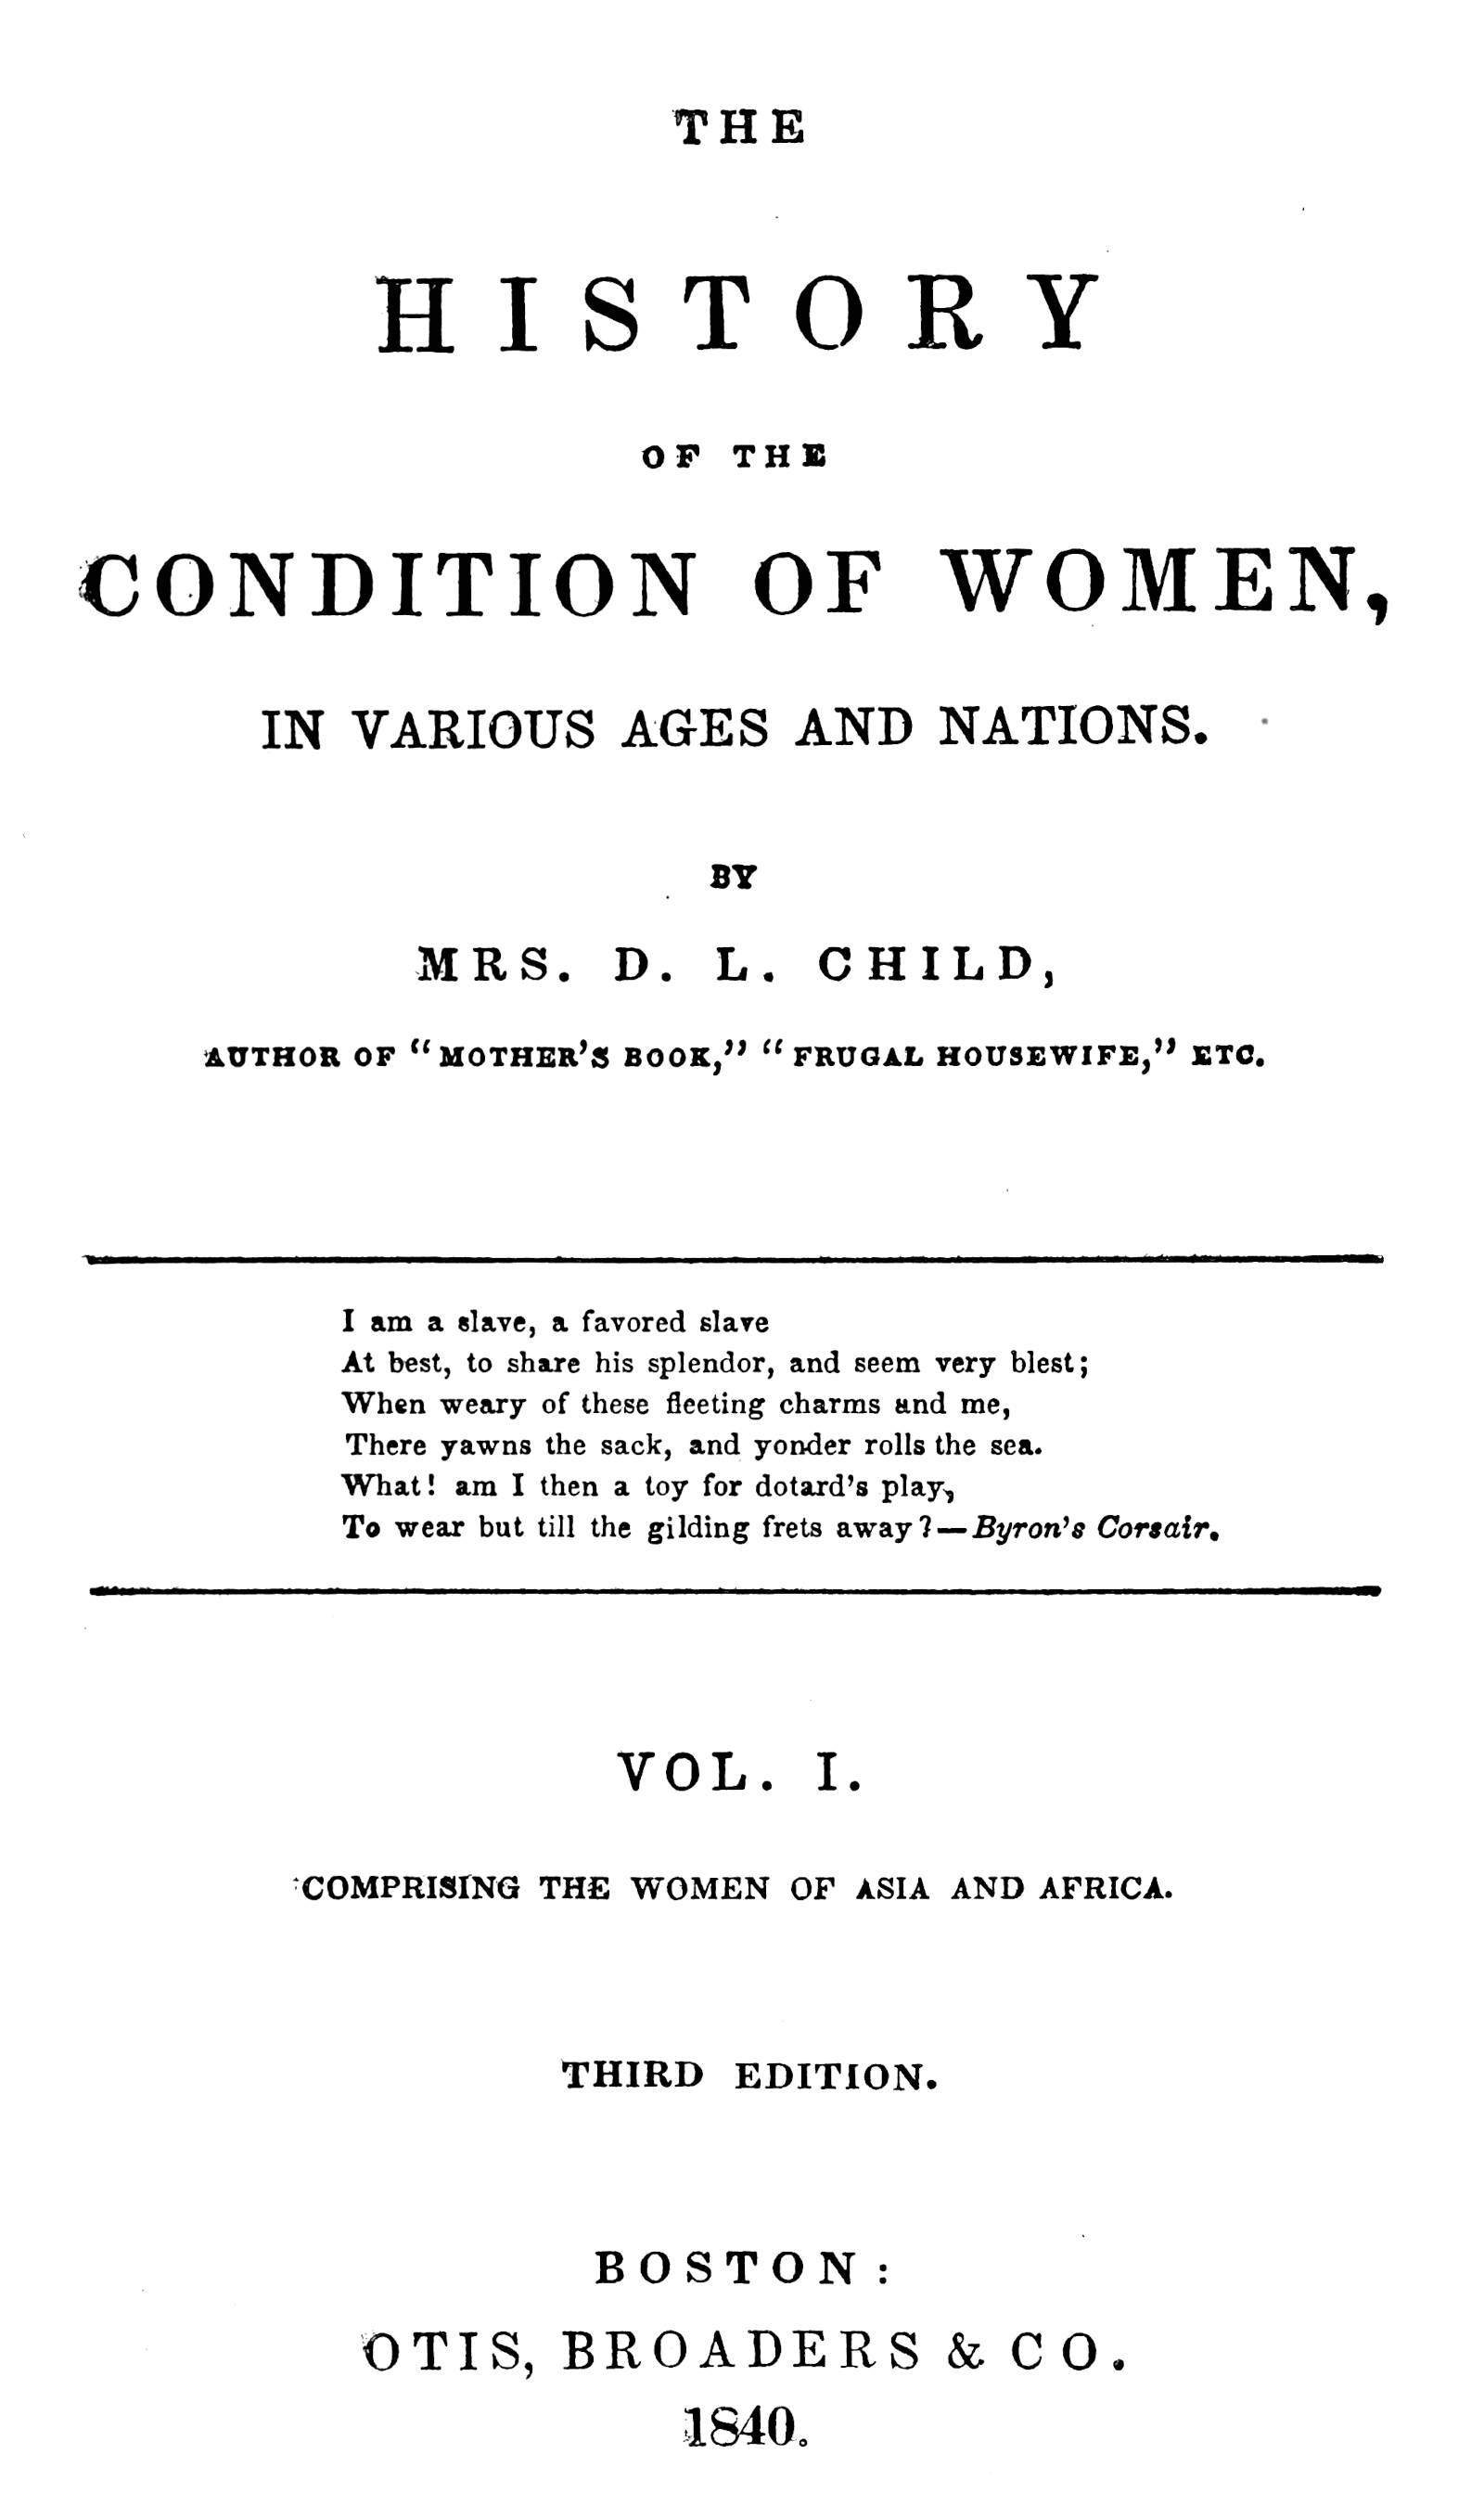 The history of the condition of women in various ages and nations